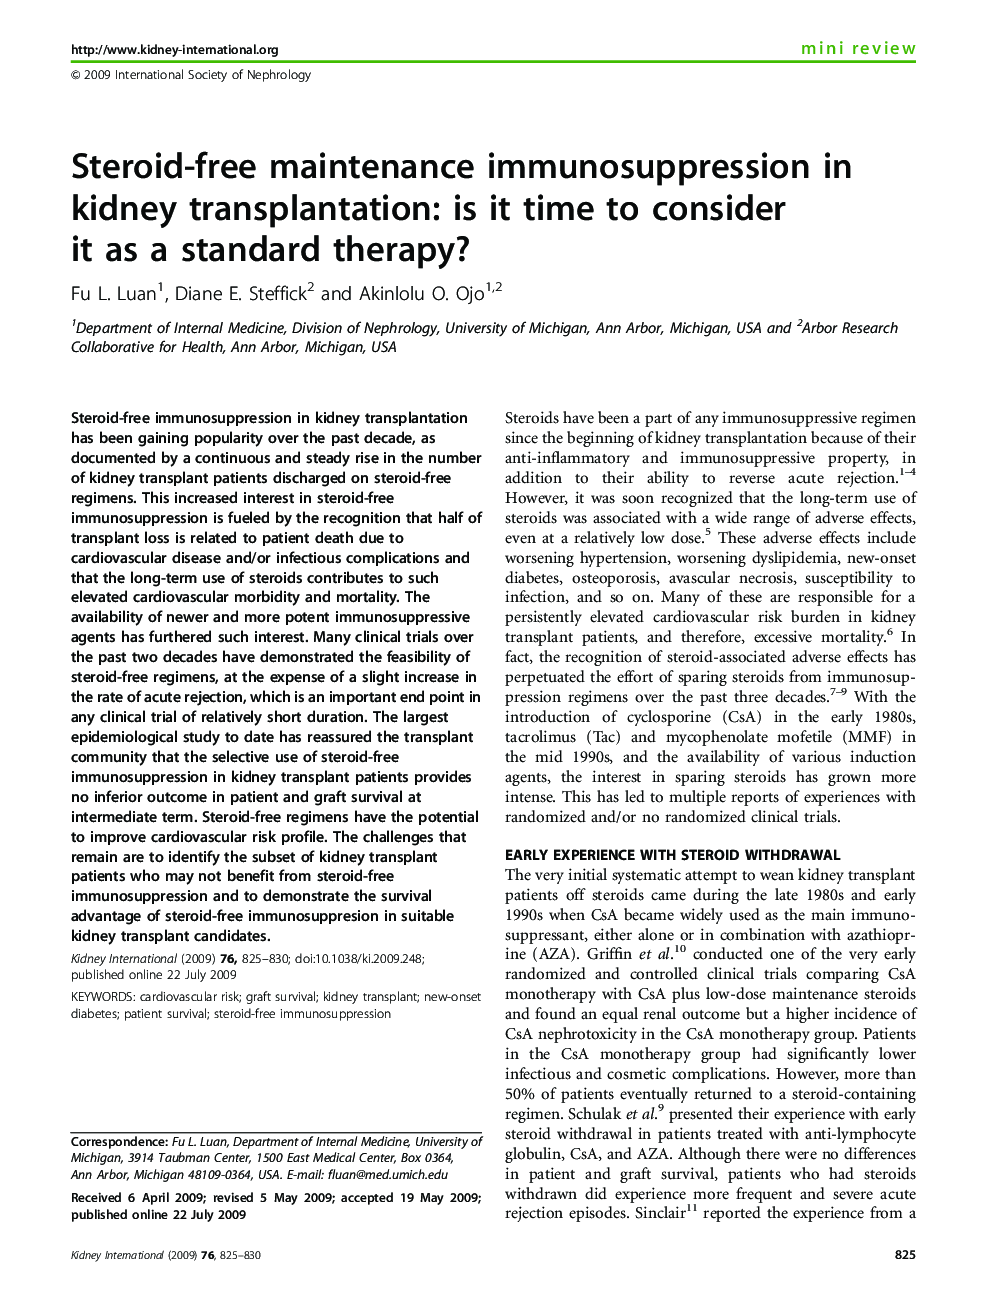 Steroid-free maintenance immunosuppression in kidney transplantation: is it time to consider it as a standard therapy?